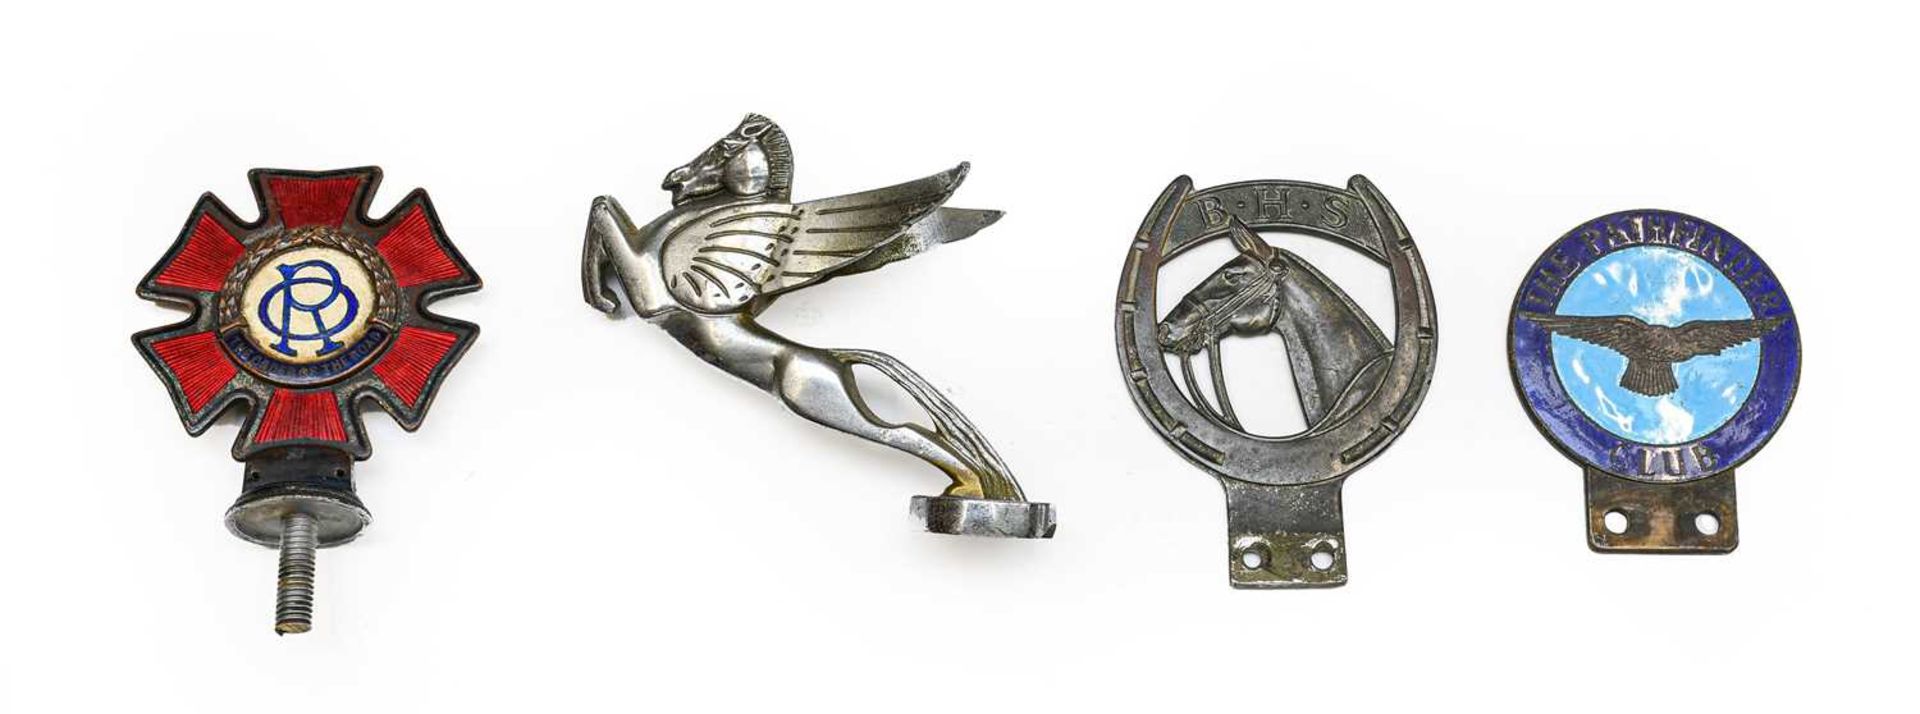 A 1920/30 Nickel-Plated Pegasus Car Mascot, 12cm high; A Red Enamelled Order of the Road Car